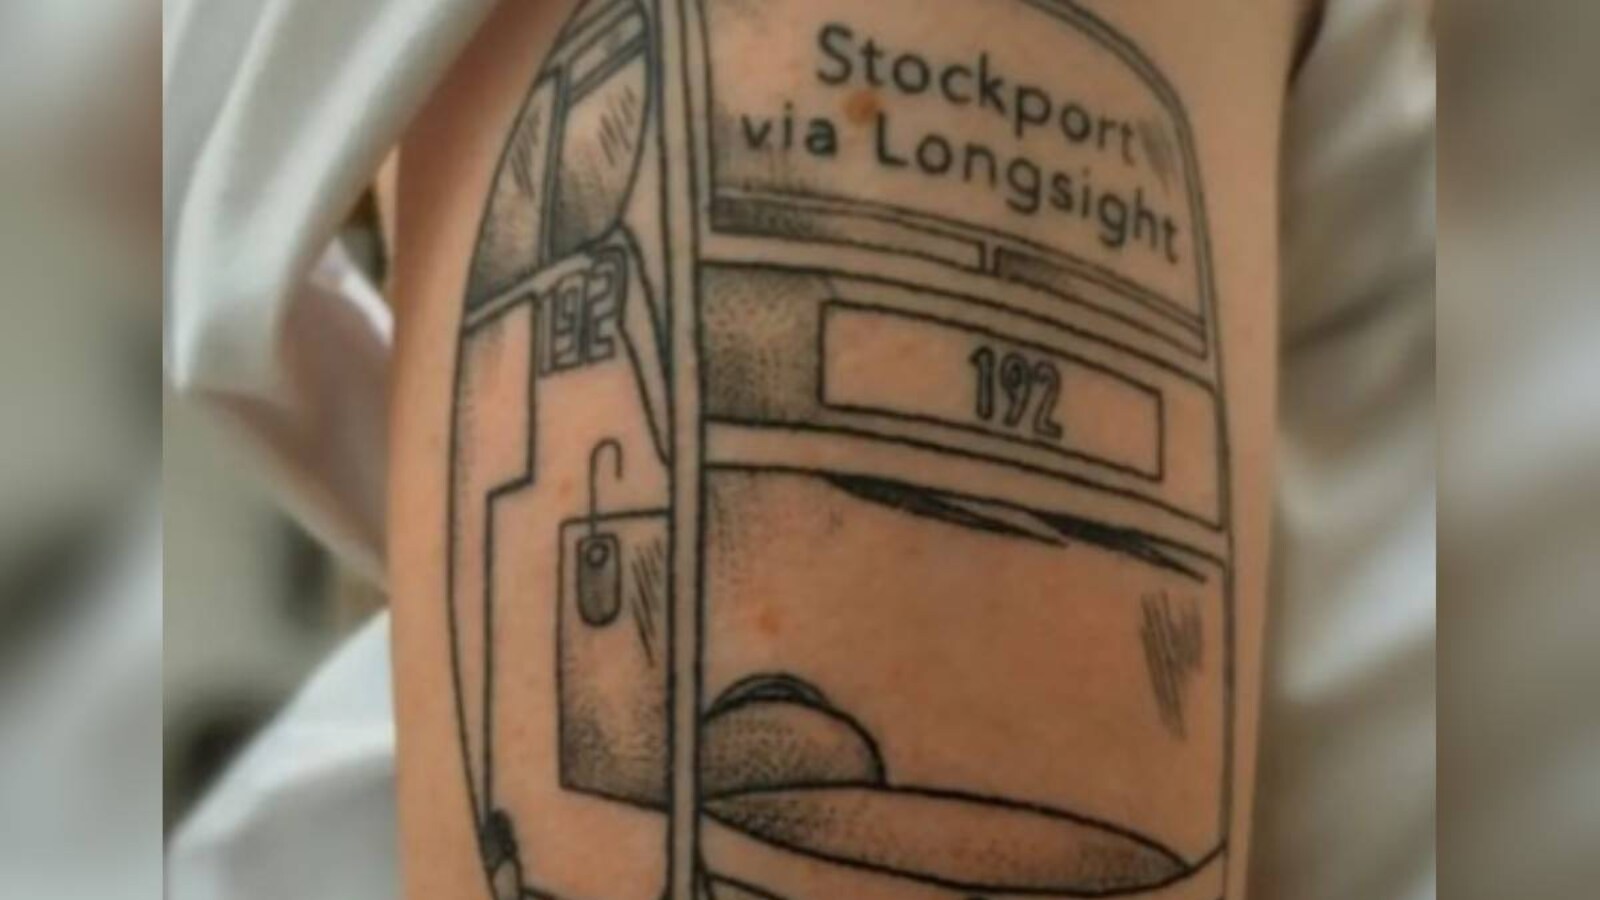 Stockport bus lover's family think tattoo is 'insane' - BBC News